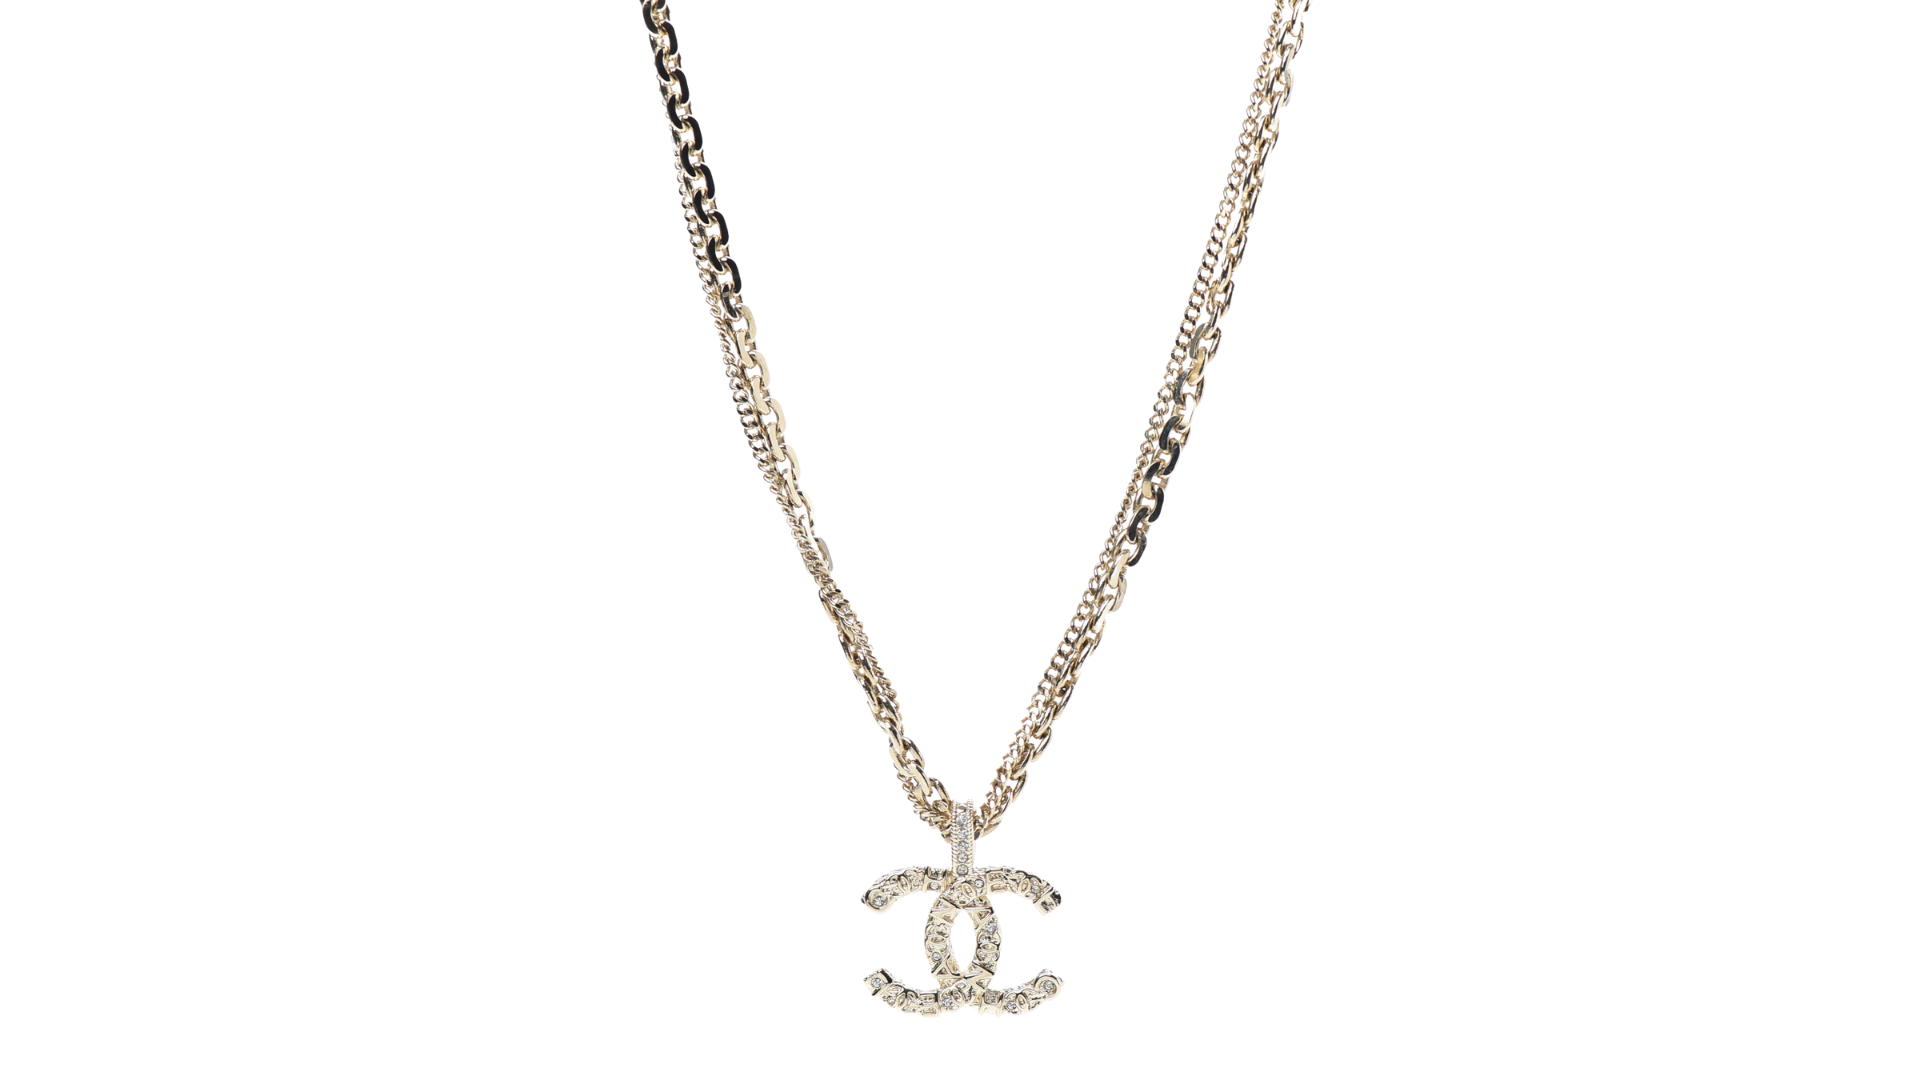 Chanel Crystal CC Multi Strand Chain Necklace Gold